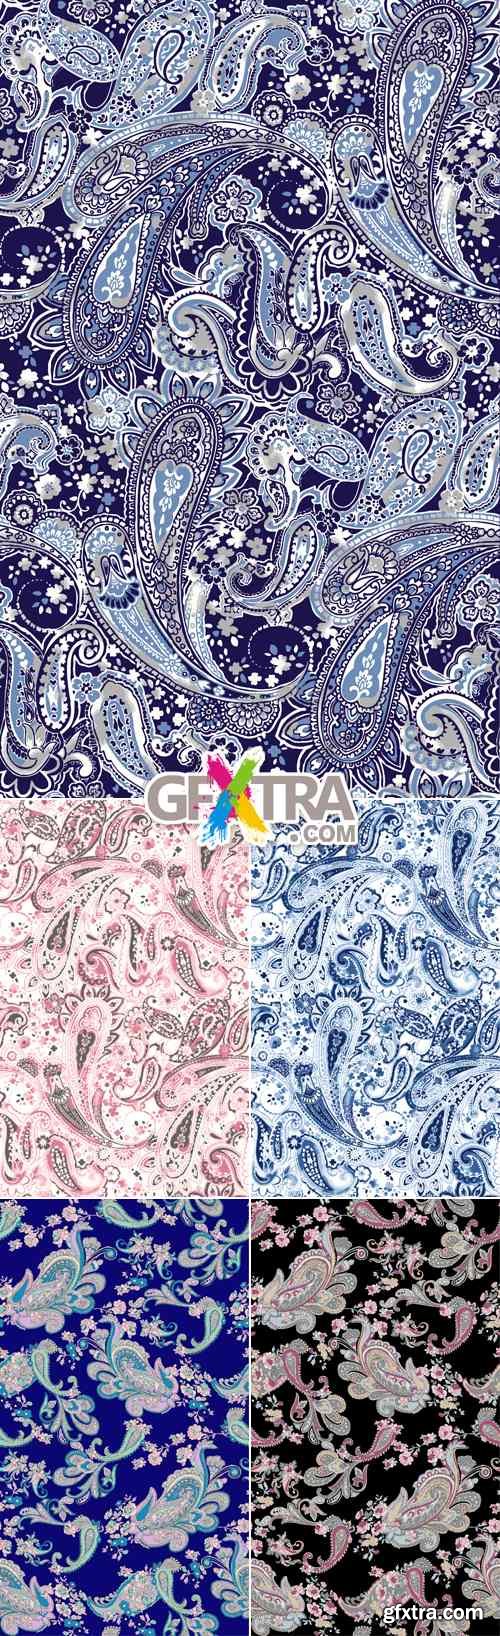 Vintage Paisley Backgrounds Vector